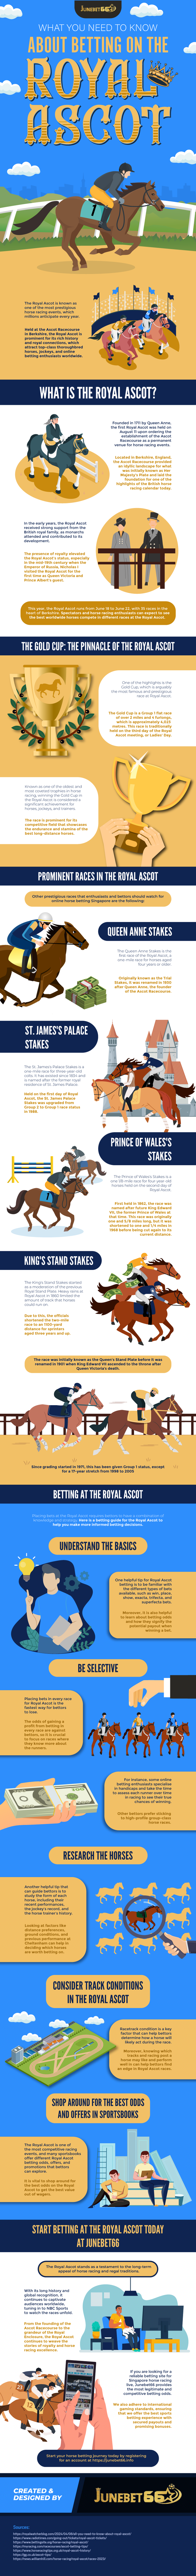 What You Need to Know About Betting on the Royal Ascot Infographic Image